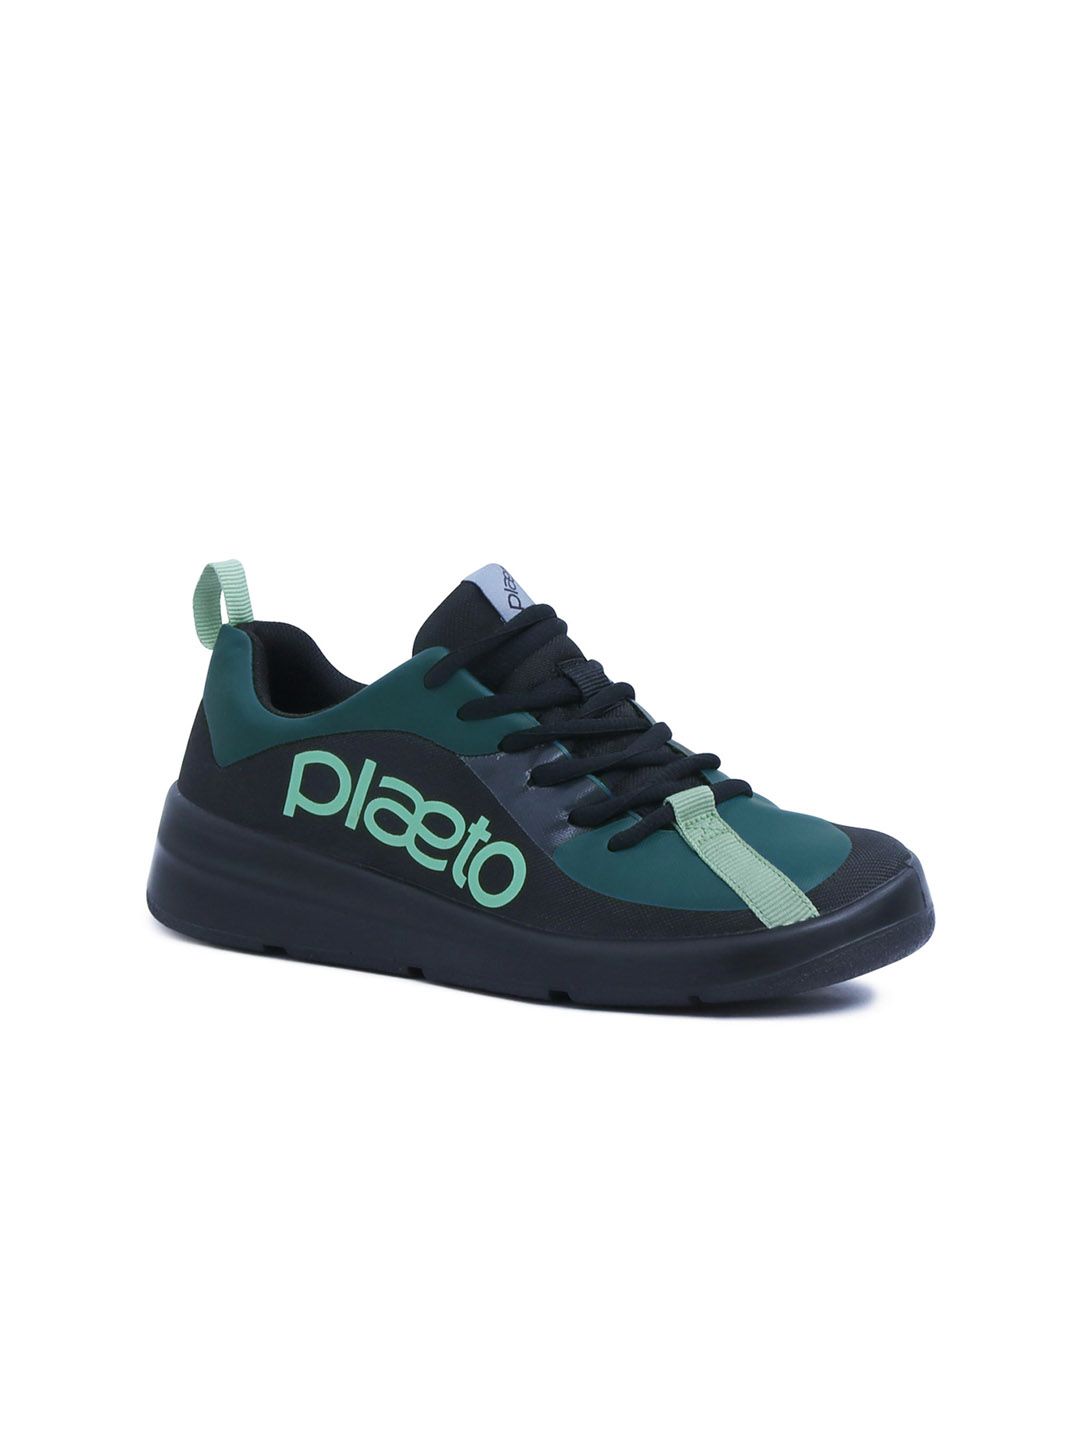 plaeto Printed Sneakers Price in India